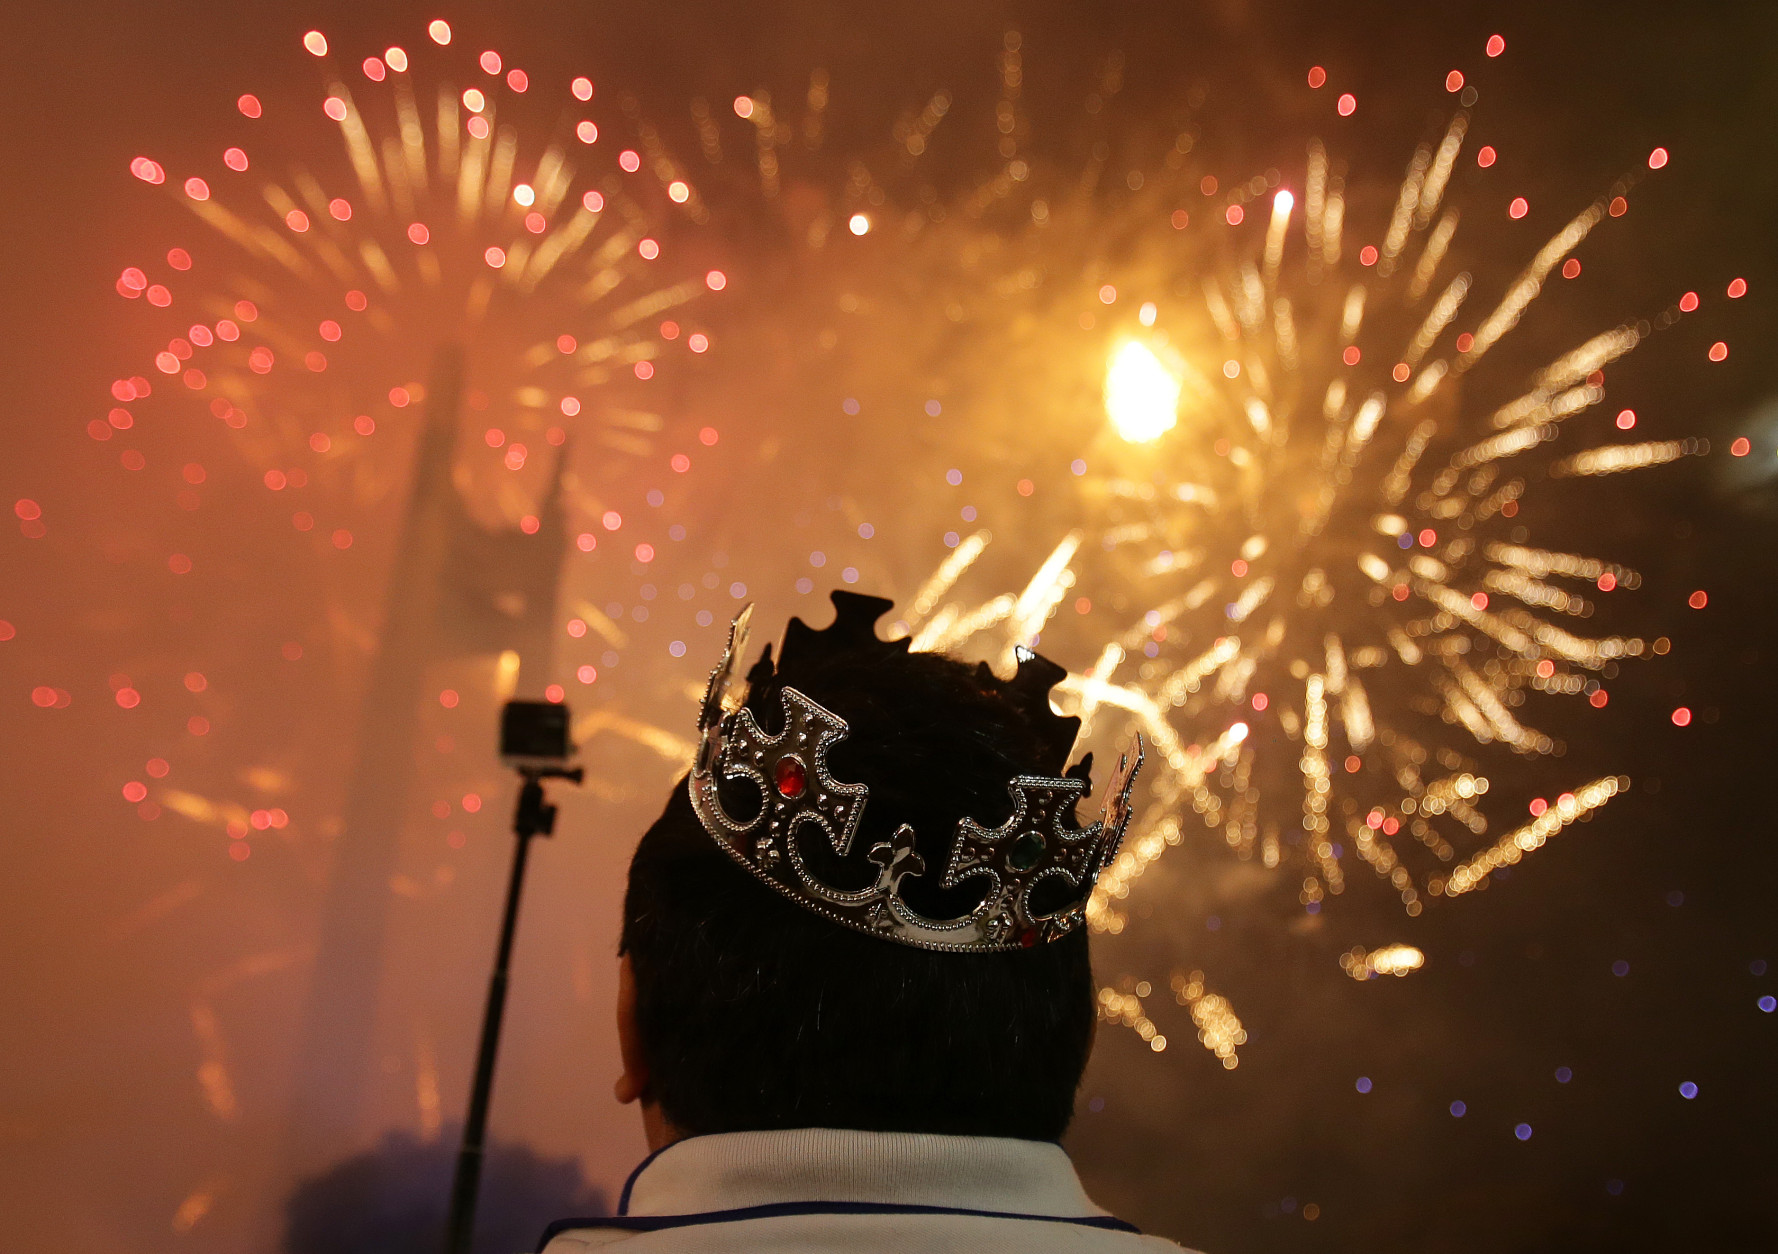 A Filipino watches a fireworks display at the Quezon Memorial Circle in suburban Quezon city, north of Manila, Philippines on Thursday, Jan. 1, 2015. (AP Photo/Aaron Favila)